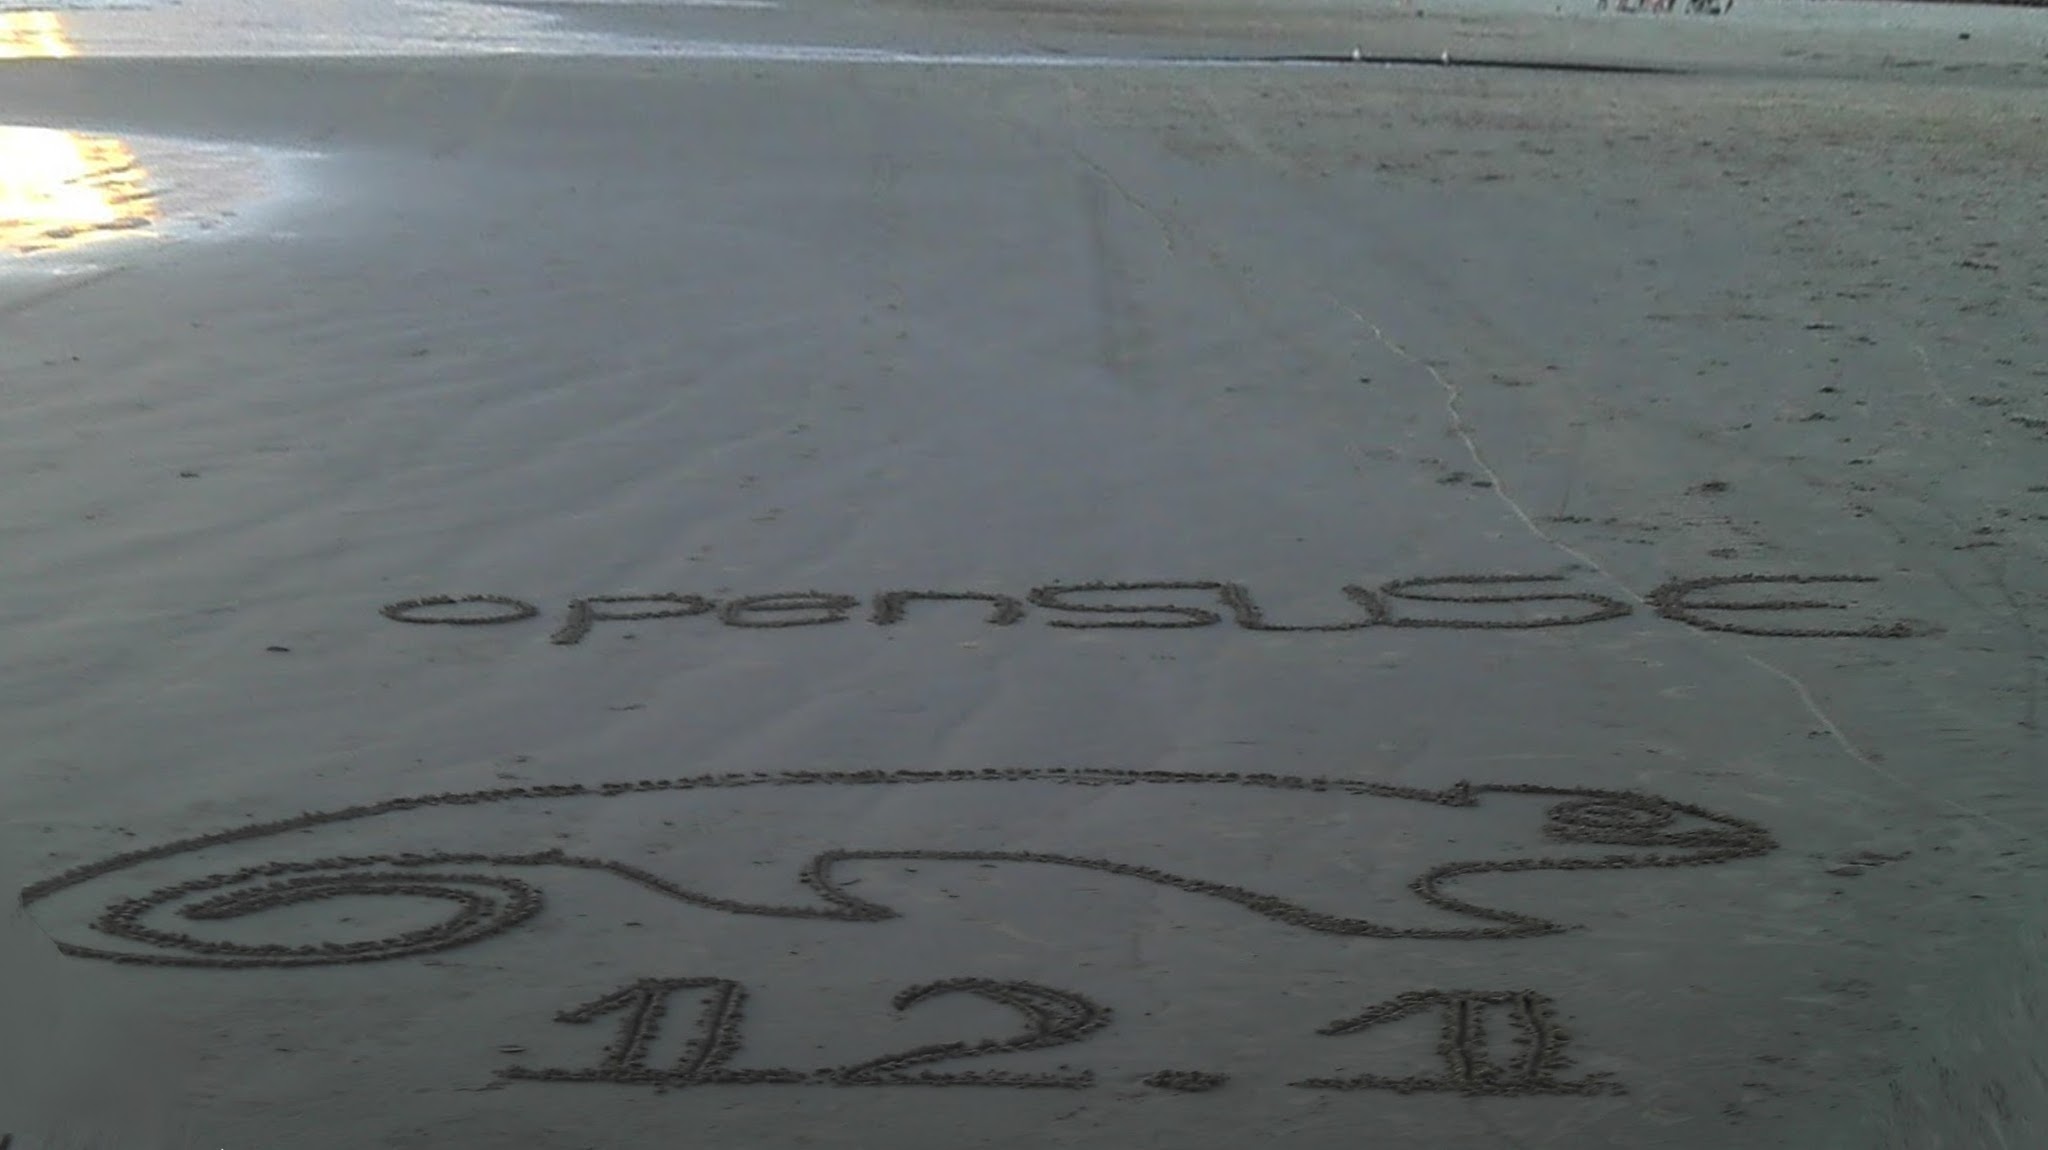 Carlos painted openSUSE on the Beach in Brazil